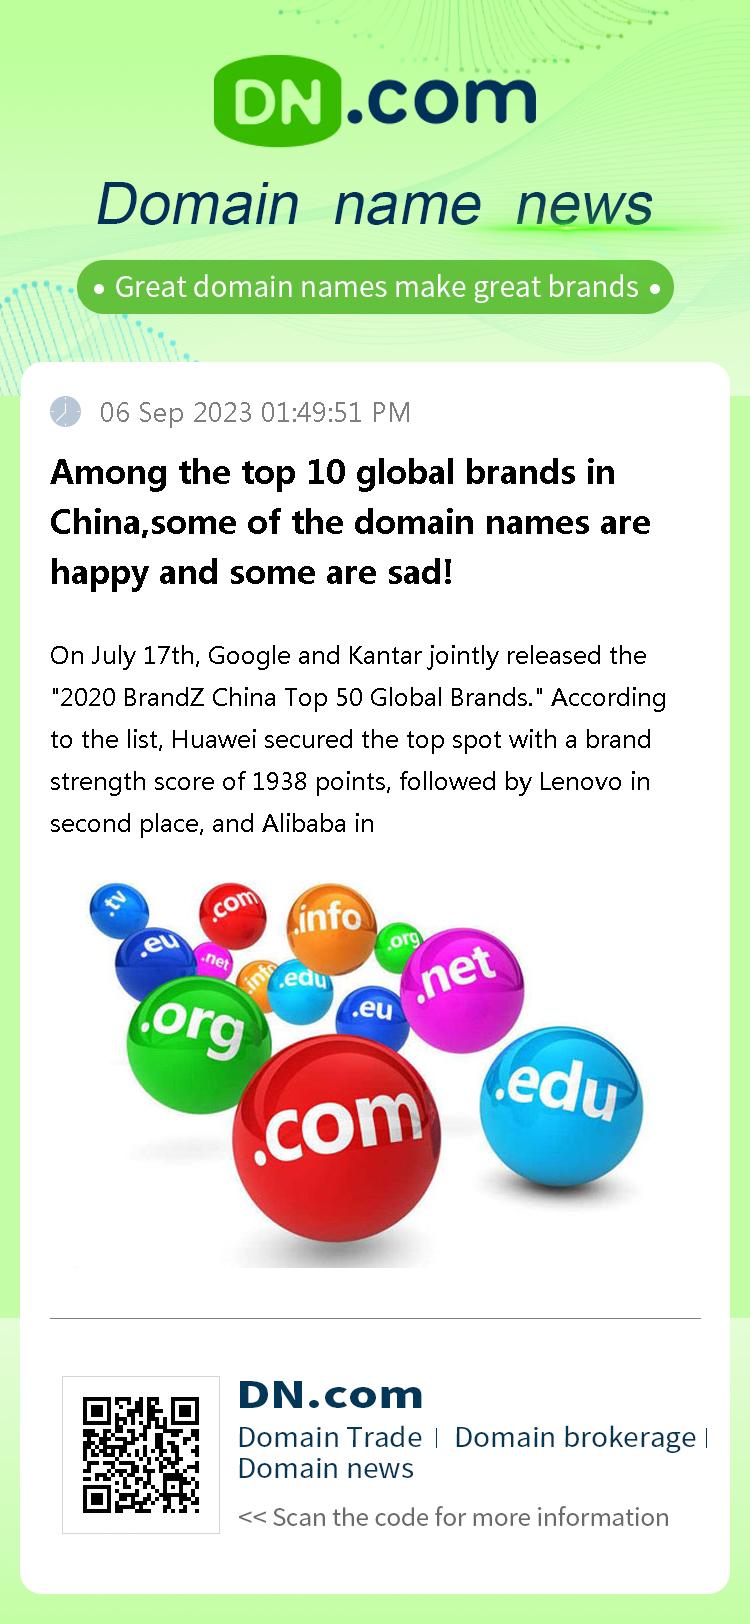 Among the top 10 global brands in China,some of the domain names are happy and some are sad!